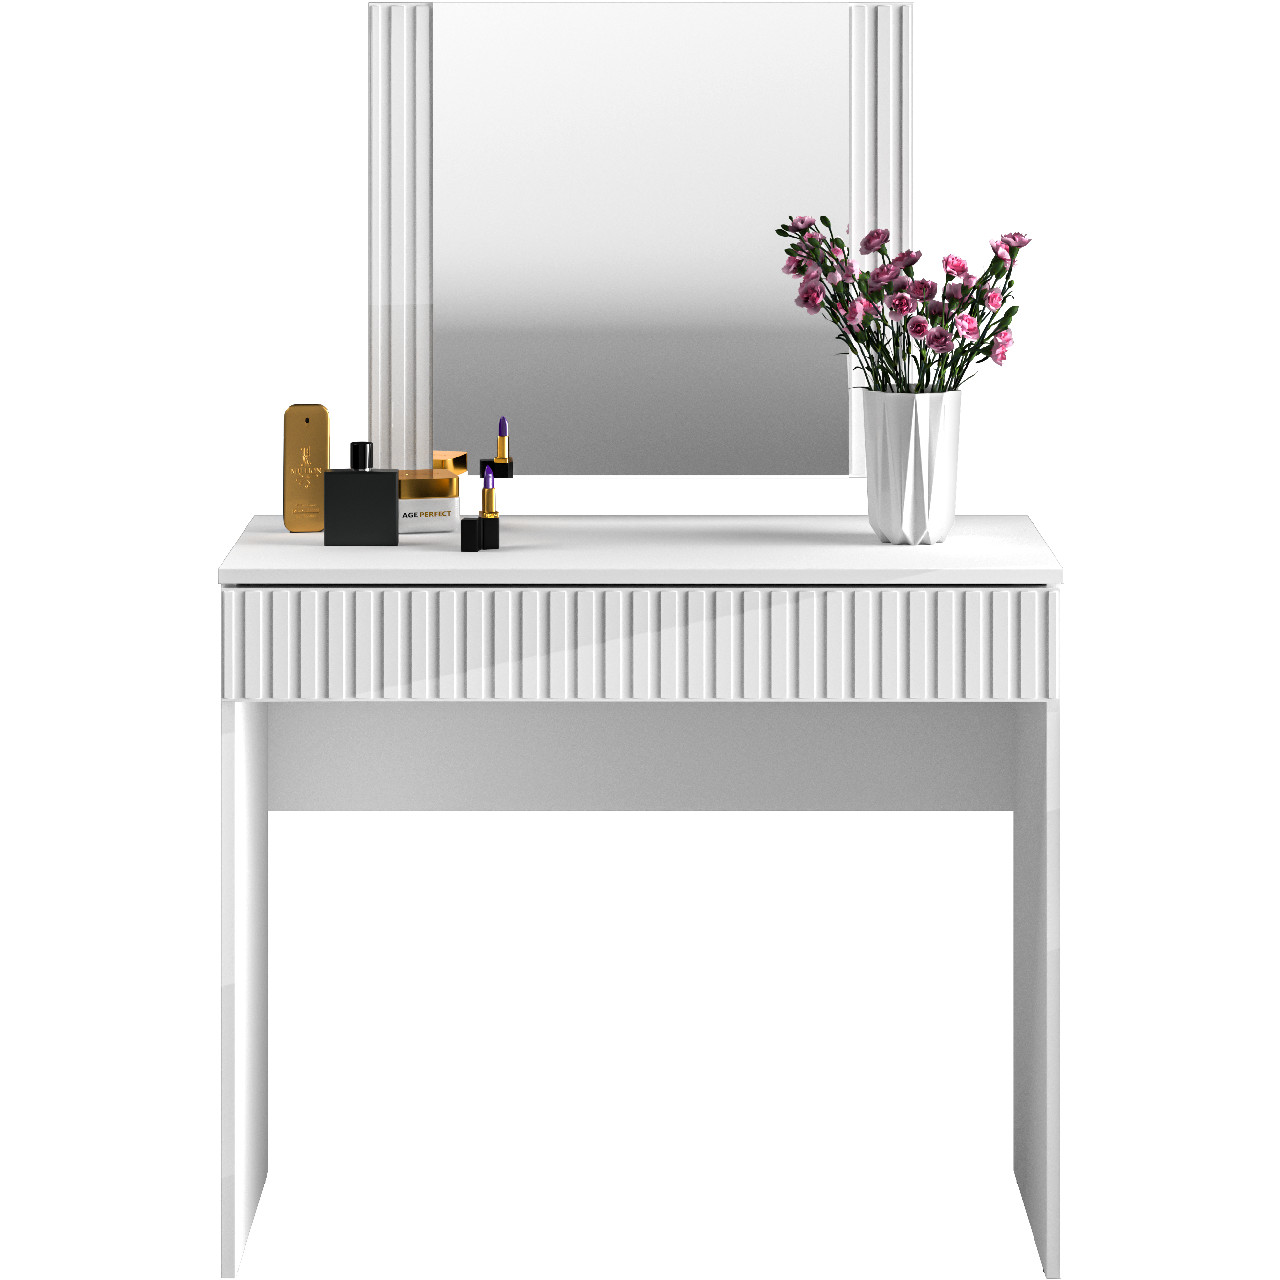 Dressing table with mirror GINO 1 white gloss